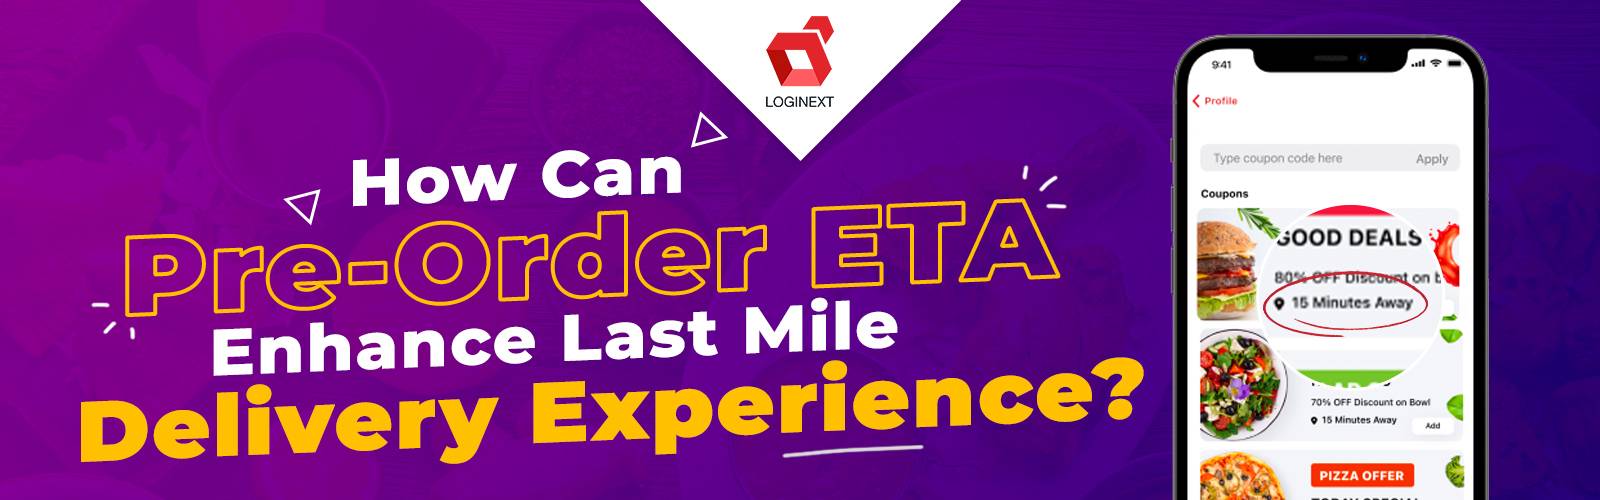 What is pre order ETA? How can it improve last mile delivery experience?